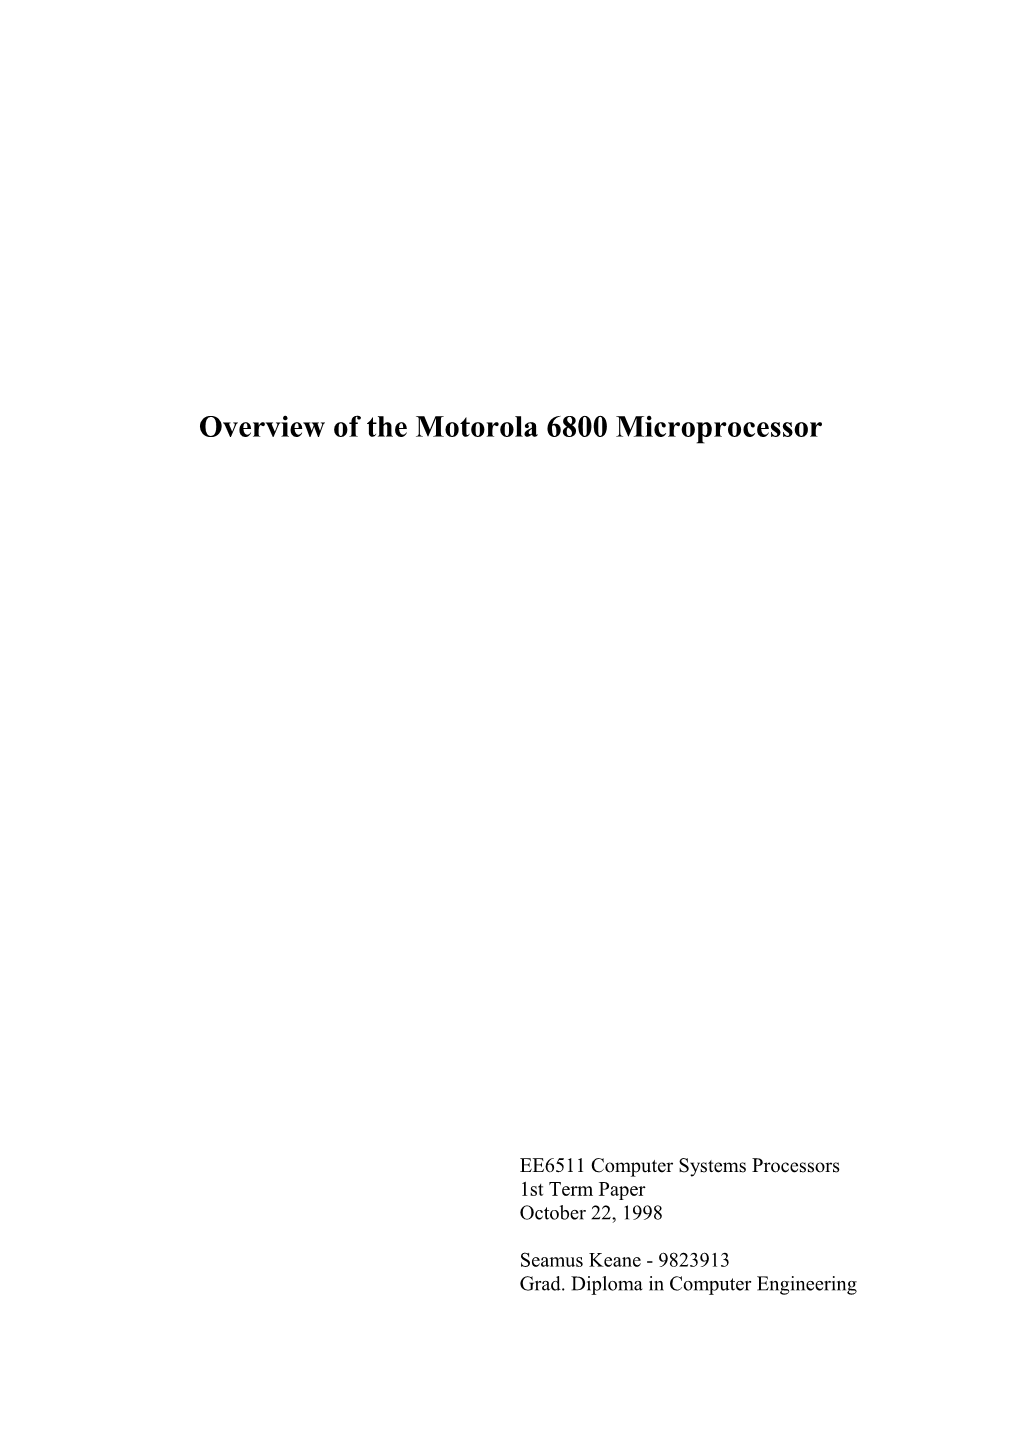 Overview of the Motorola 6800 Microprocessor